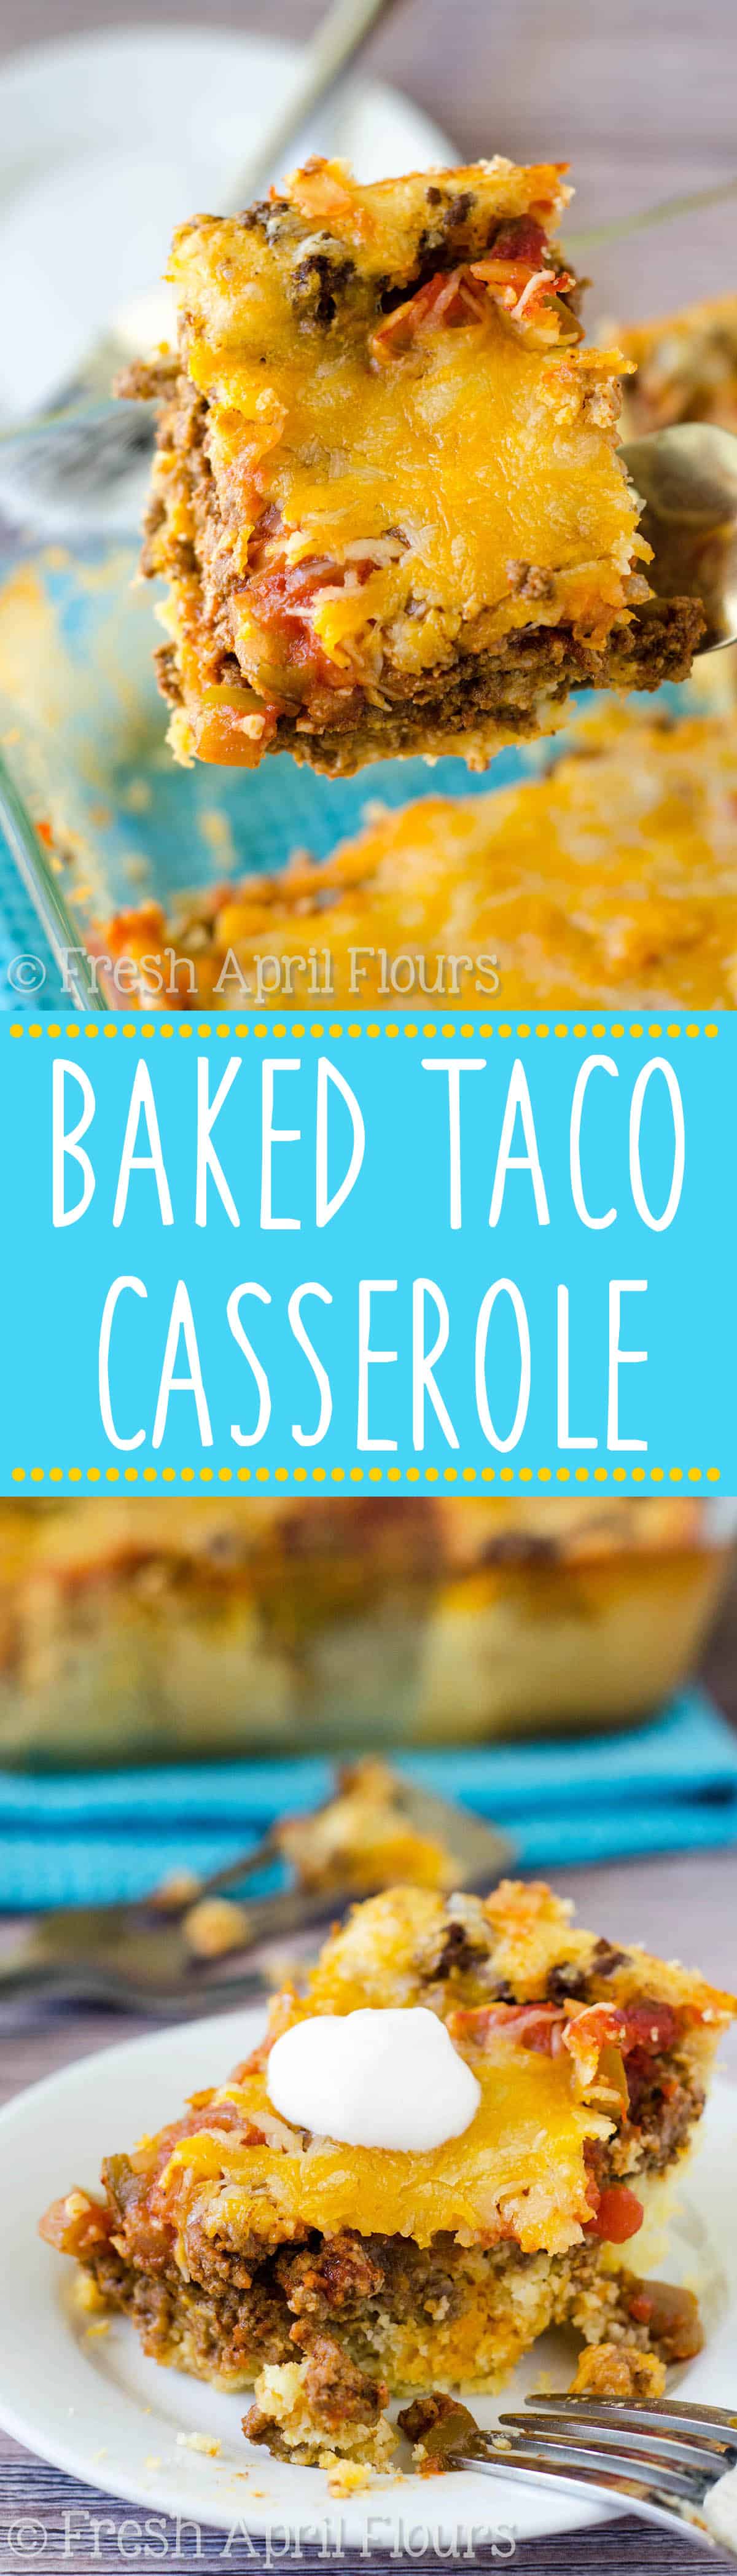 An easy casserole layered with quick cornbread, seasoned meat, salsa, and cheese. Perfect for a quick weeknight meal and makes great leftovers! via @frshaprilflours